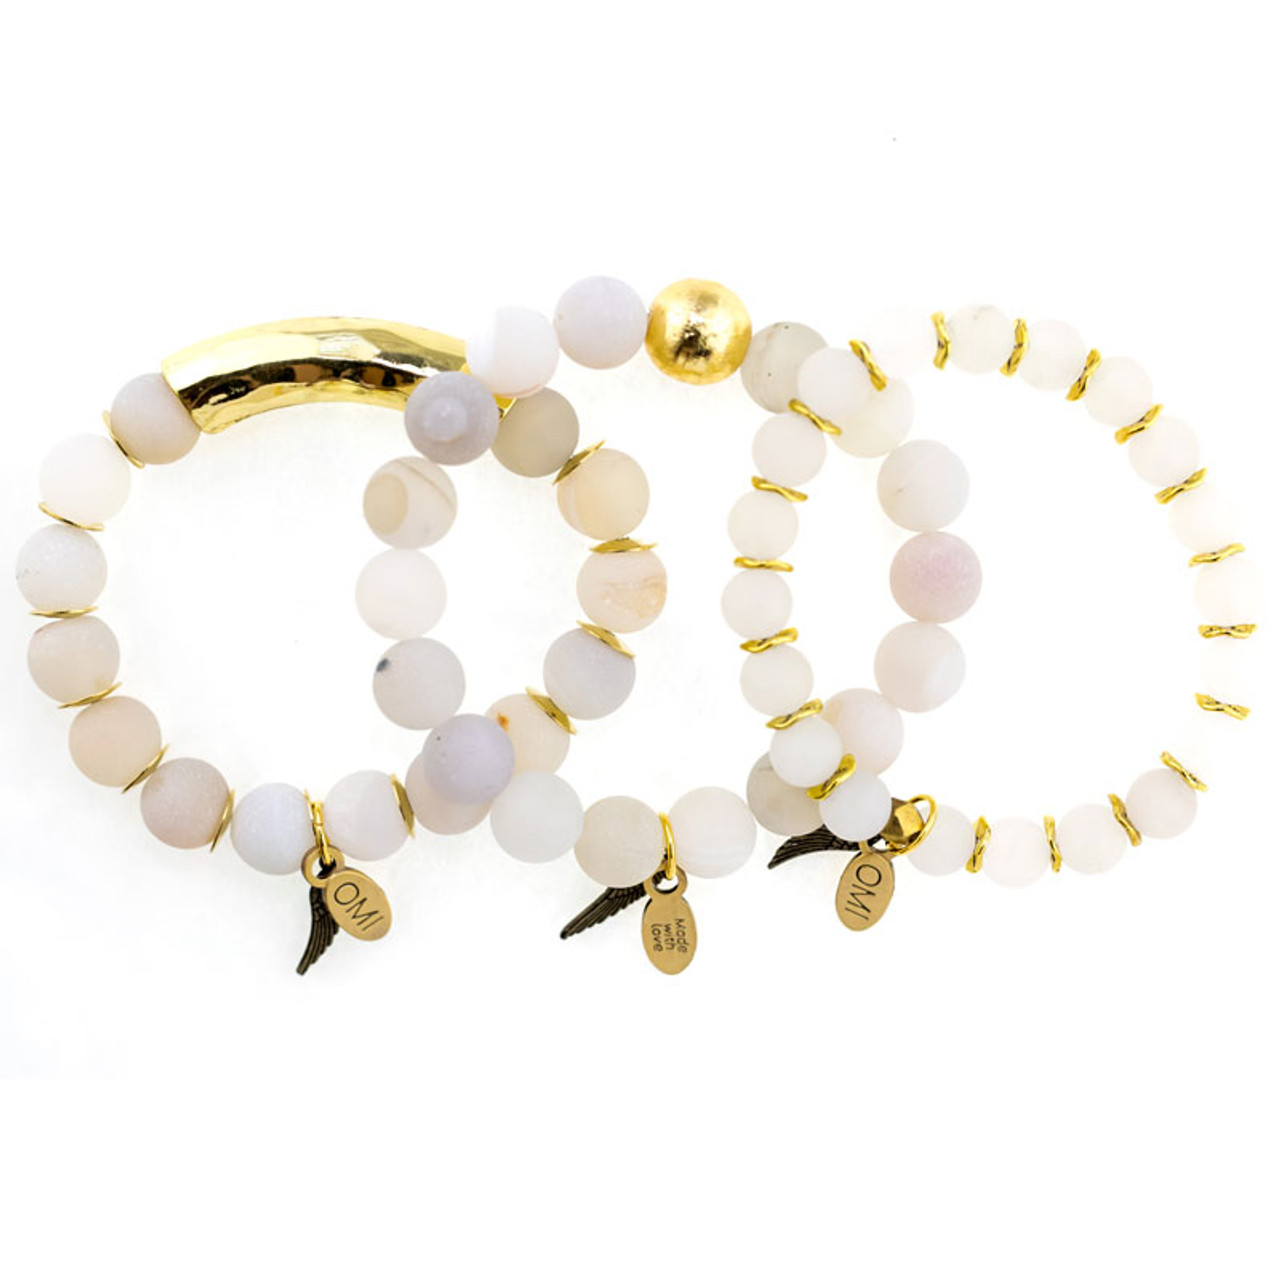 White Matte Agate Stone Bead Bracelet with Bronze Spacers- 10mm